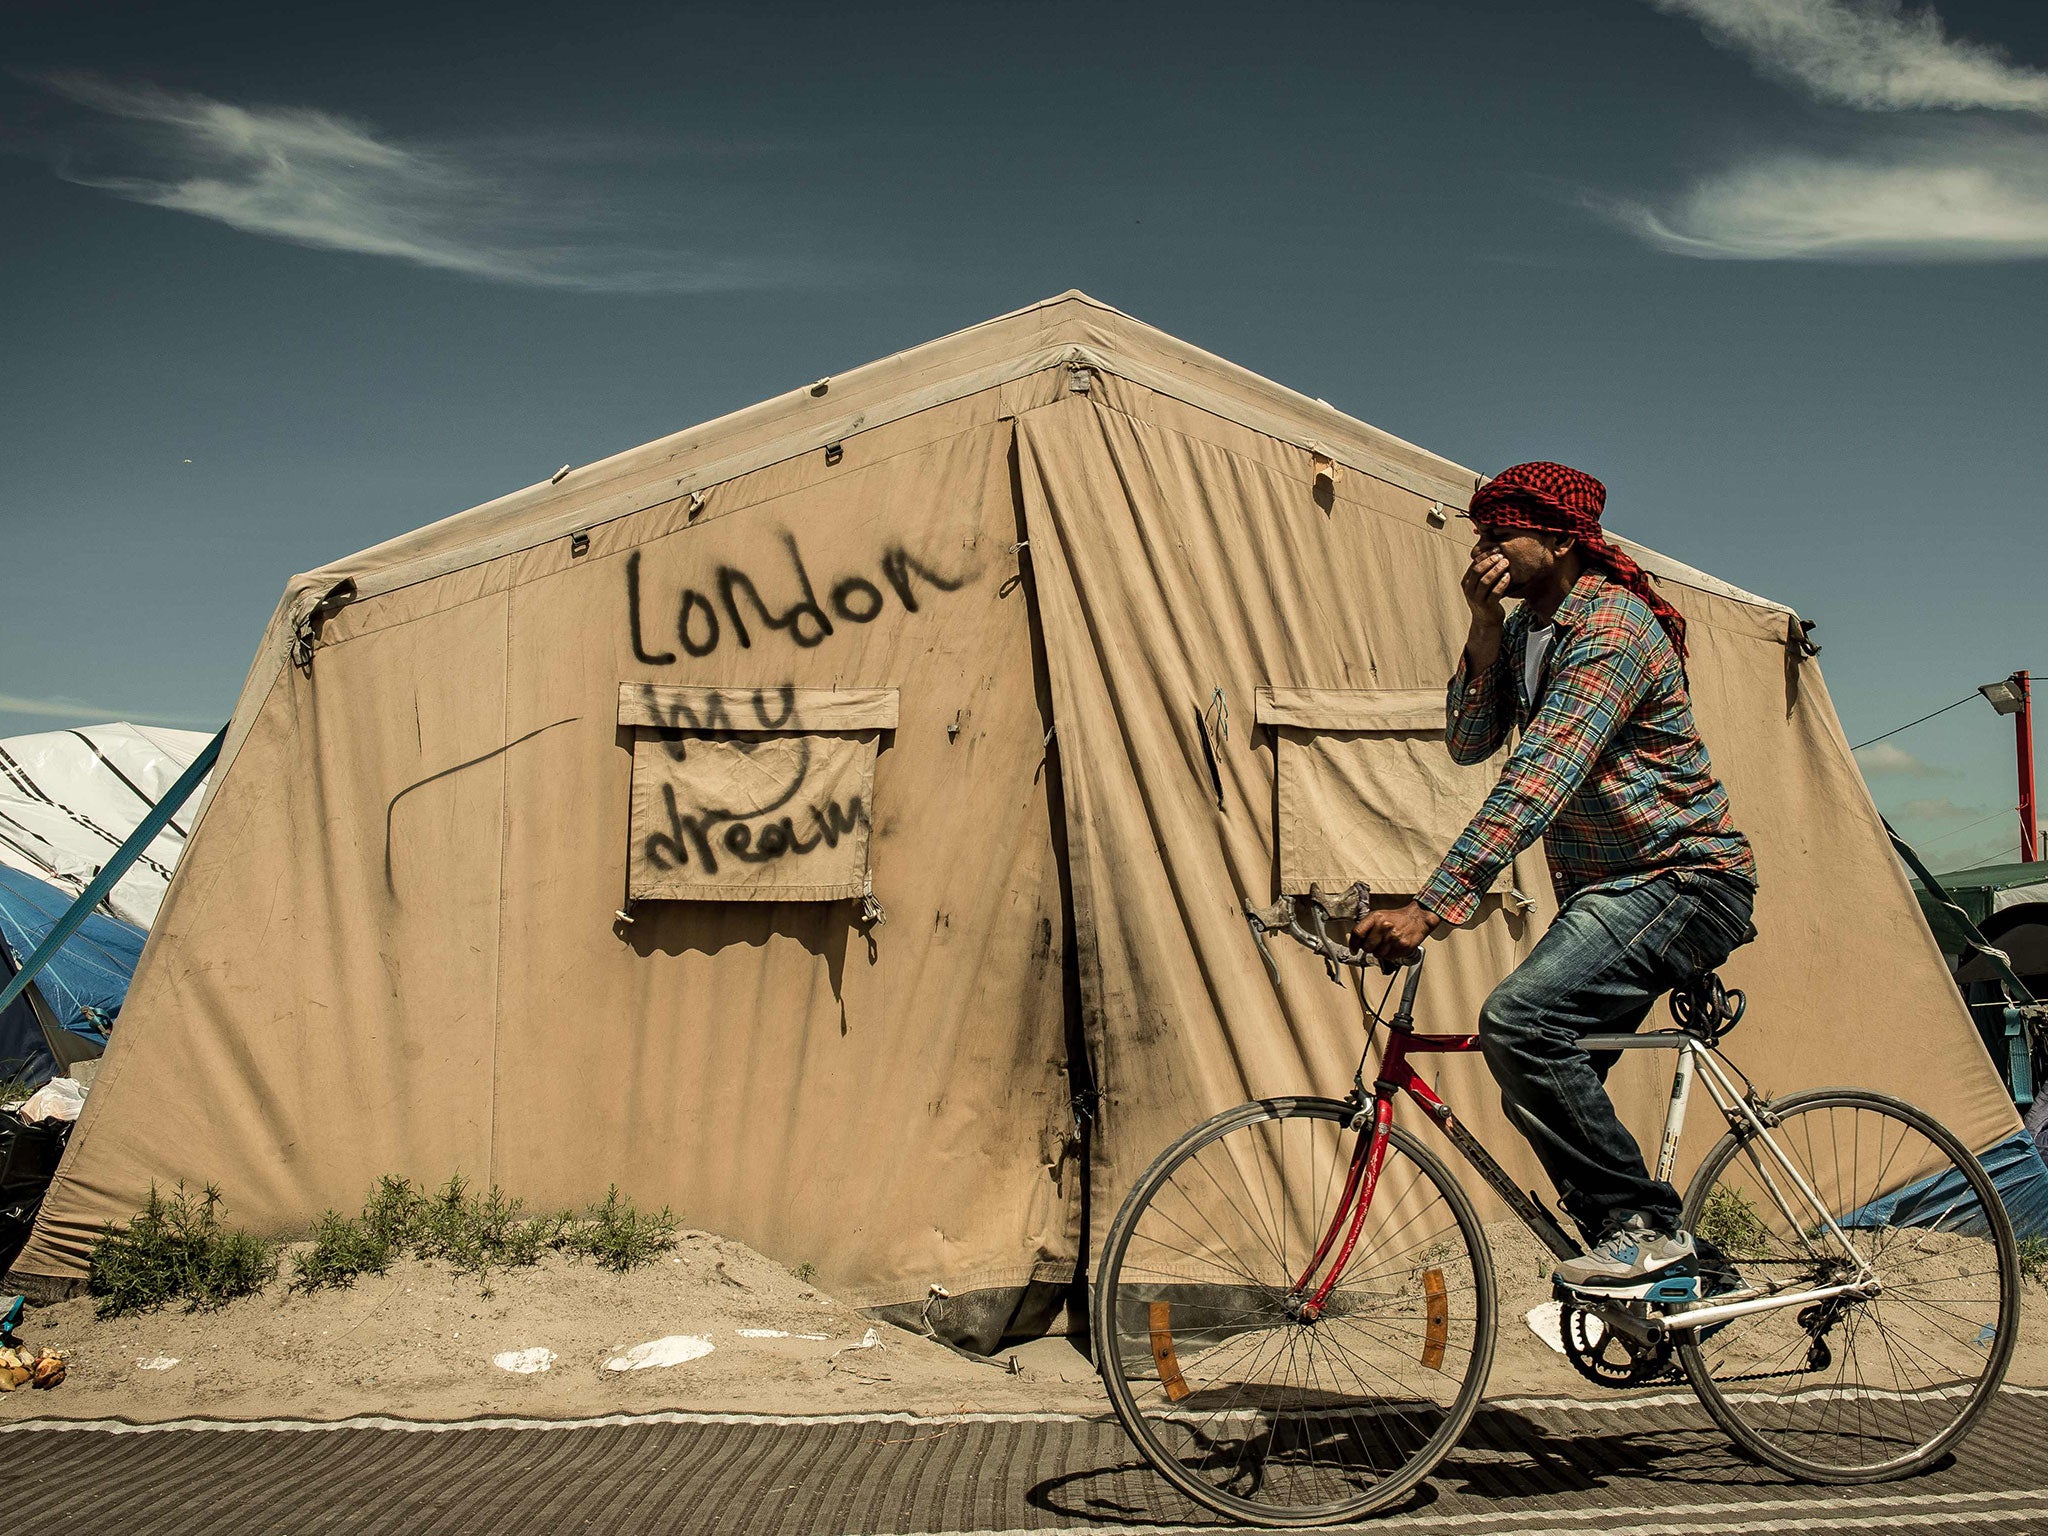 A migrant rides his bicycle inside the "Jungle" camp for migrants and refugees in Calais on June 24, the day after Britain voted to leave the EU.